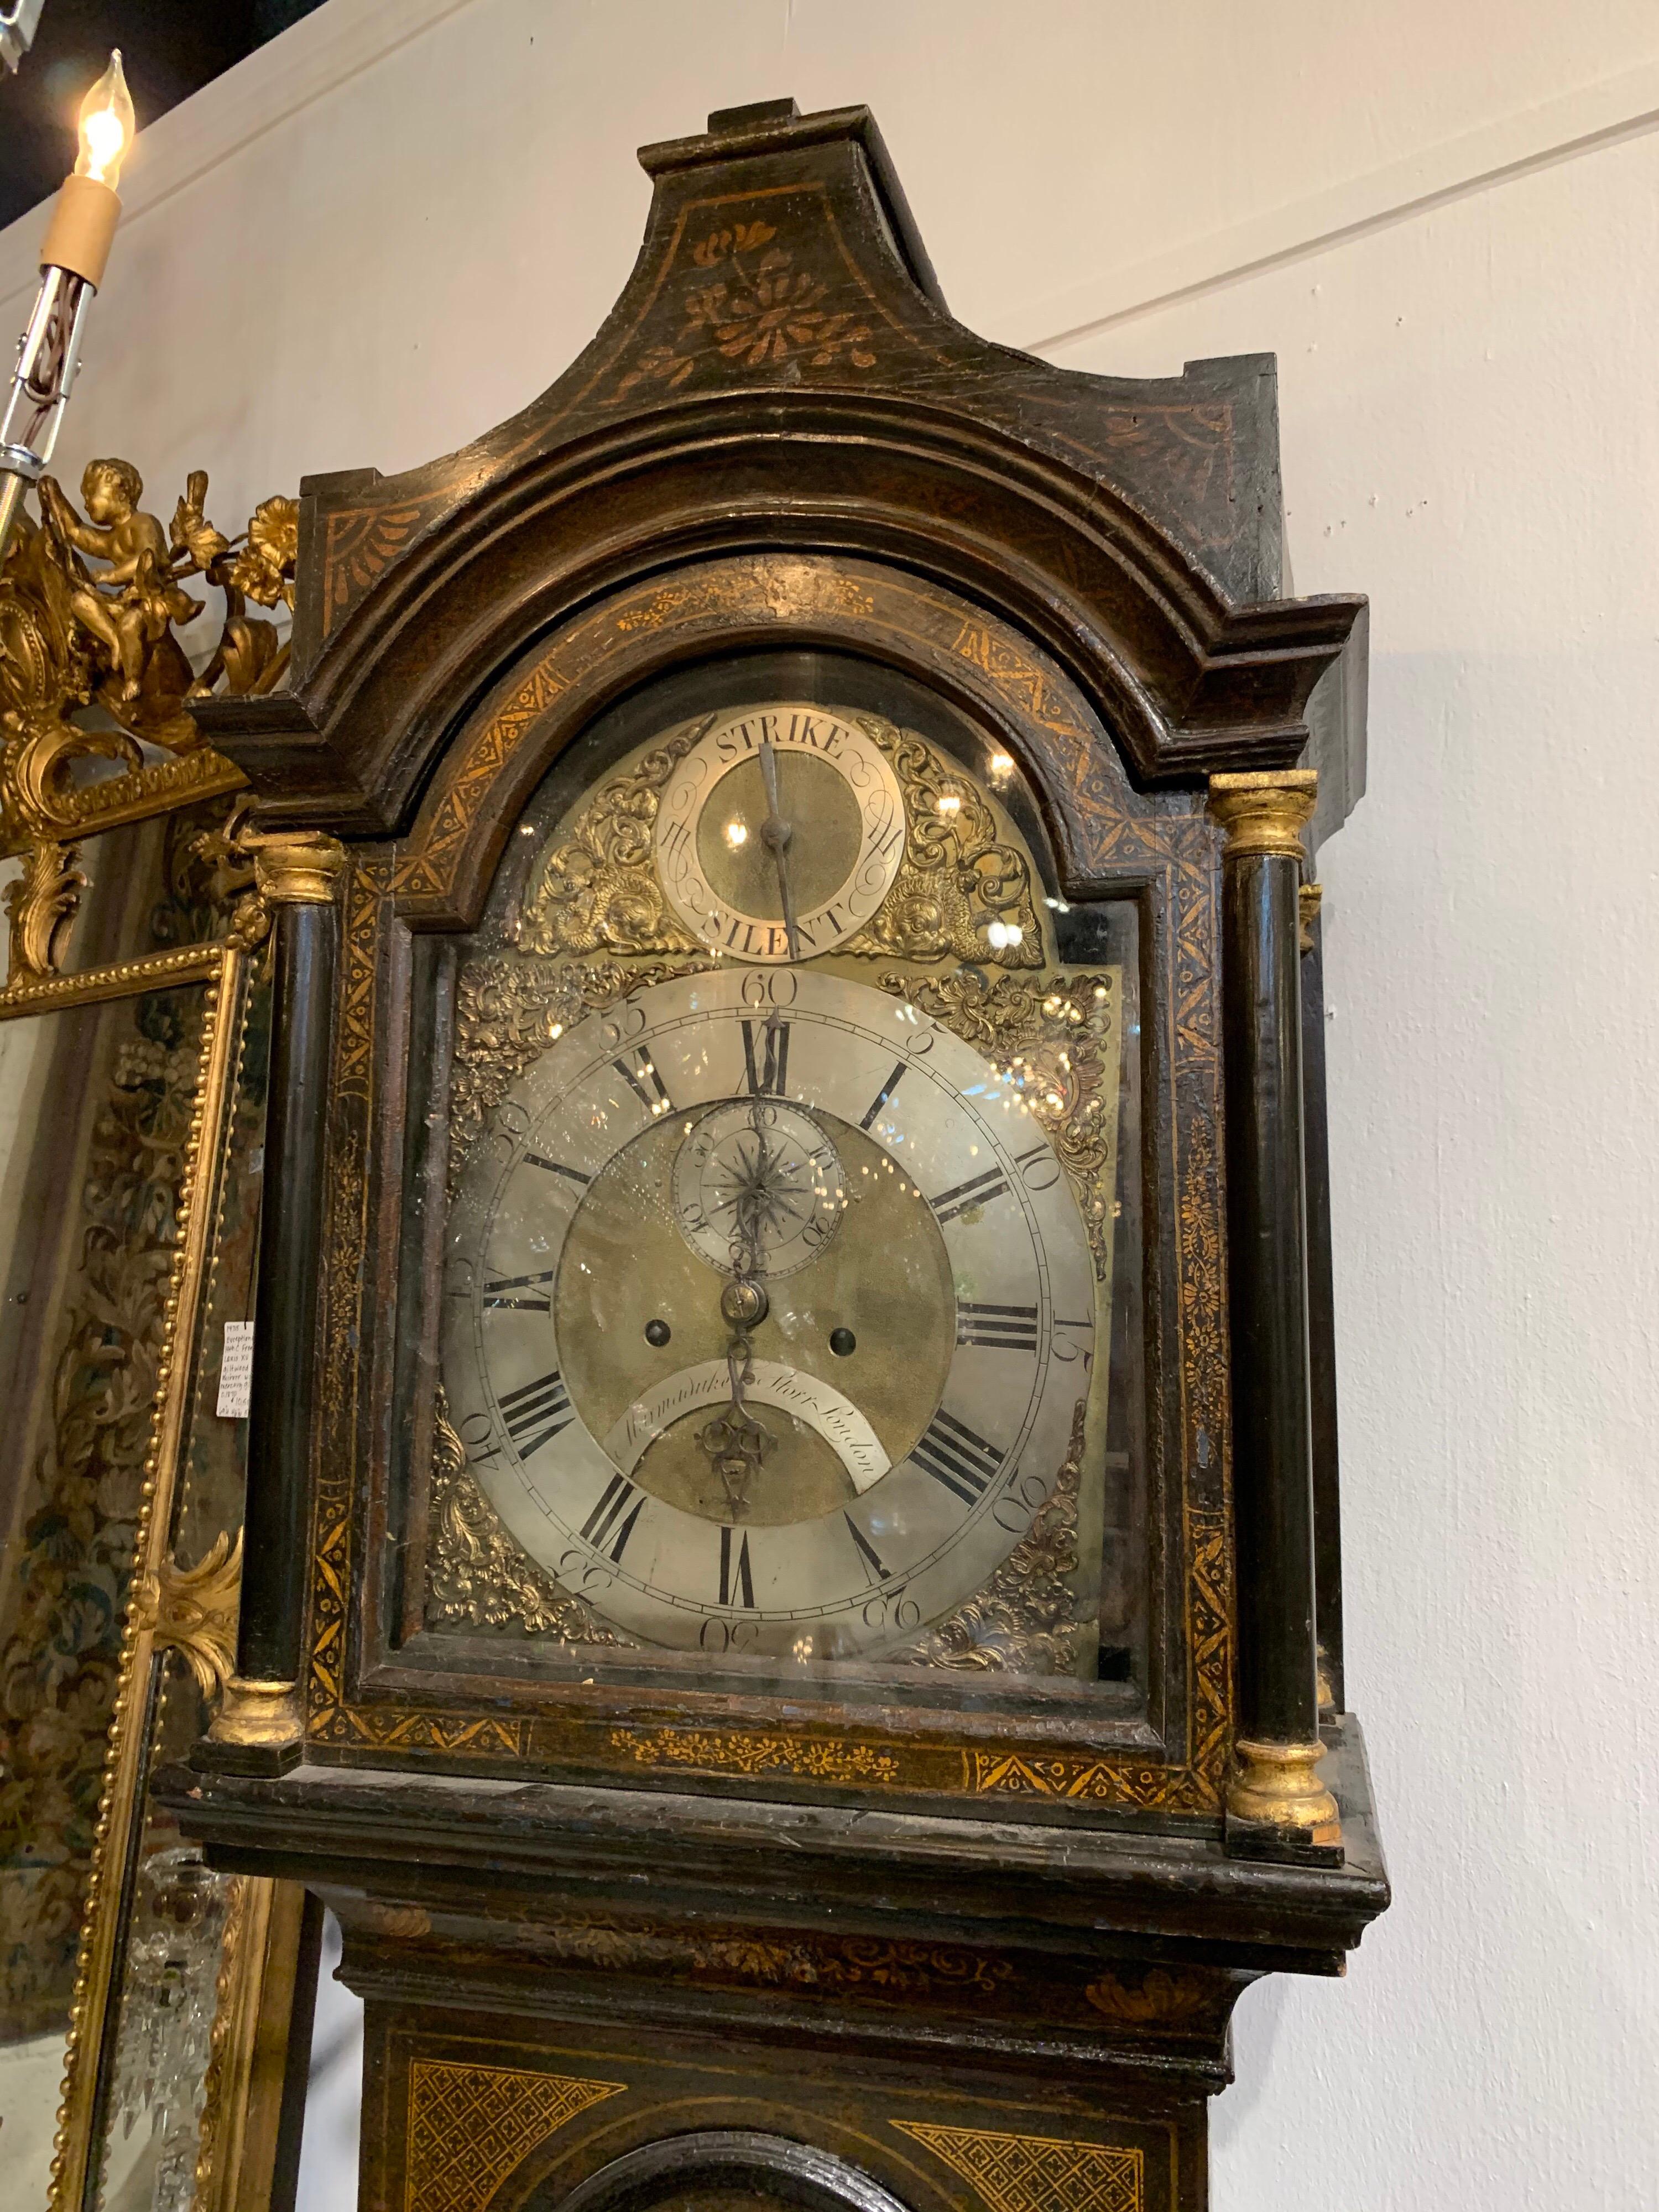 Beautiful 19th century English chinoiserie tall case clock. Lovely painted images on the piece and the face of the clock has a very pretty scrolling brass design.